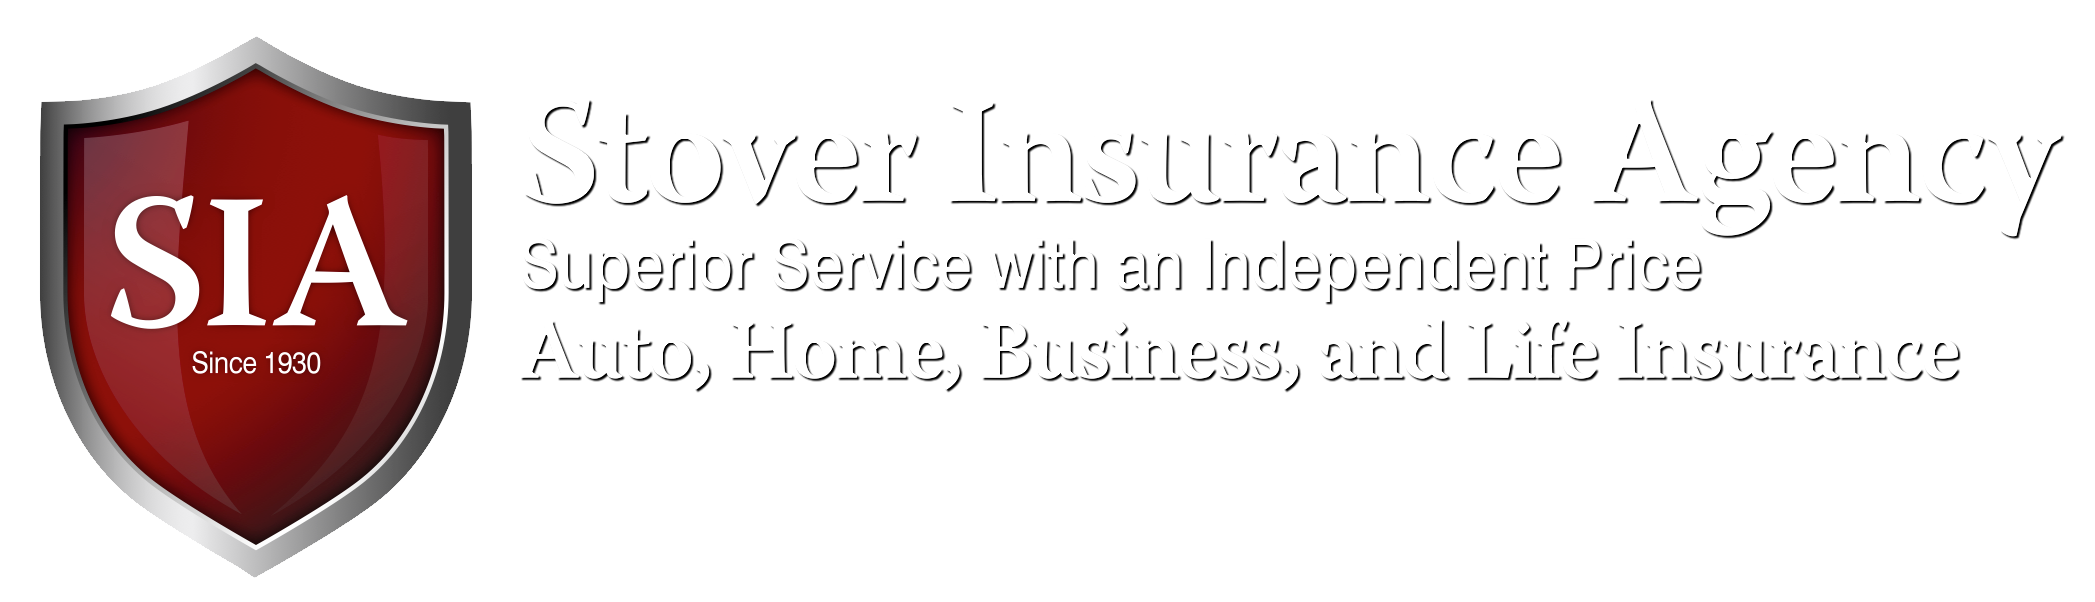 Stover Insurance Agency homepage